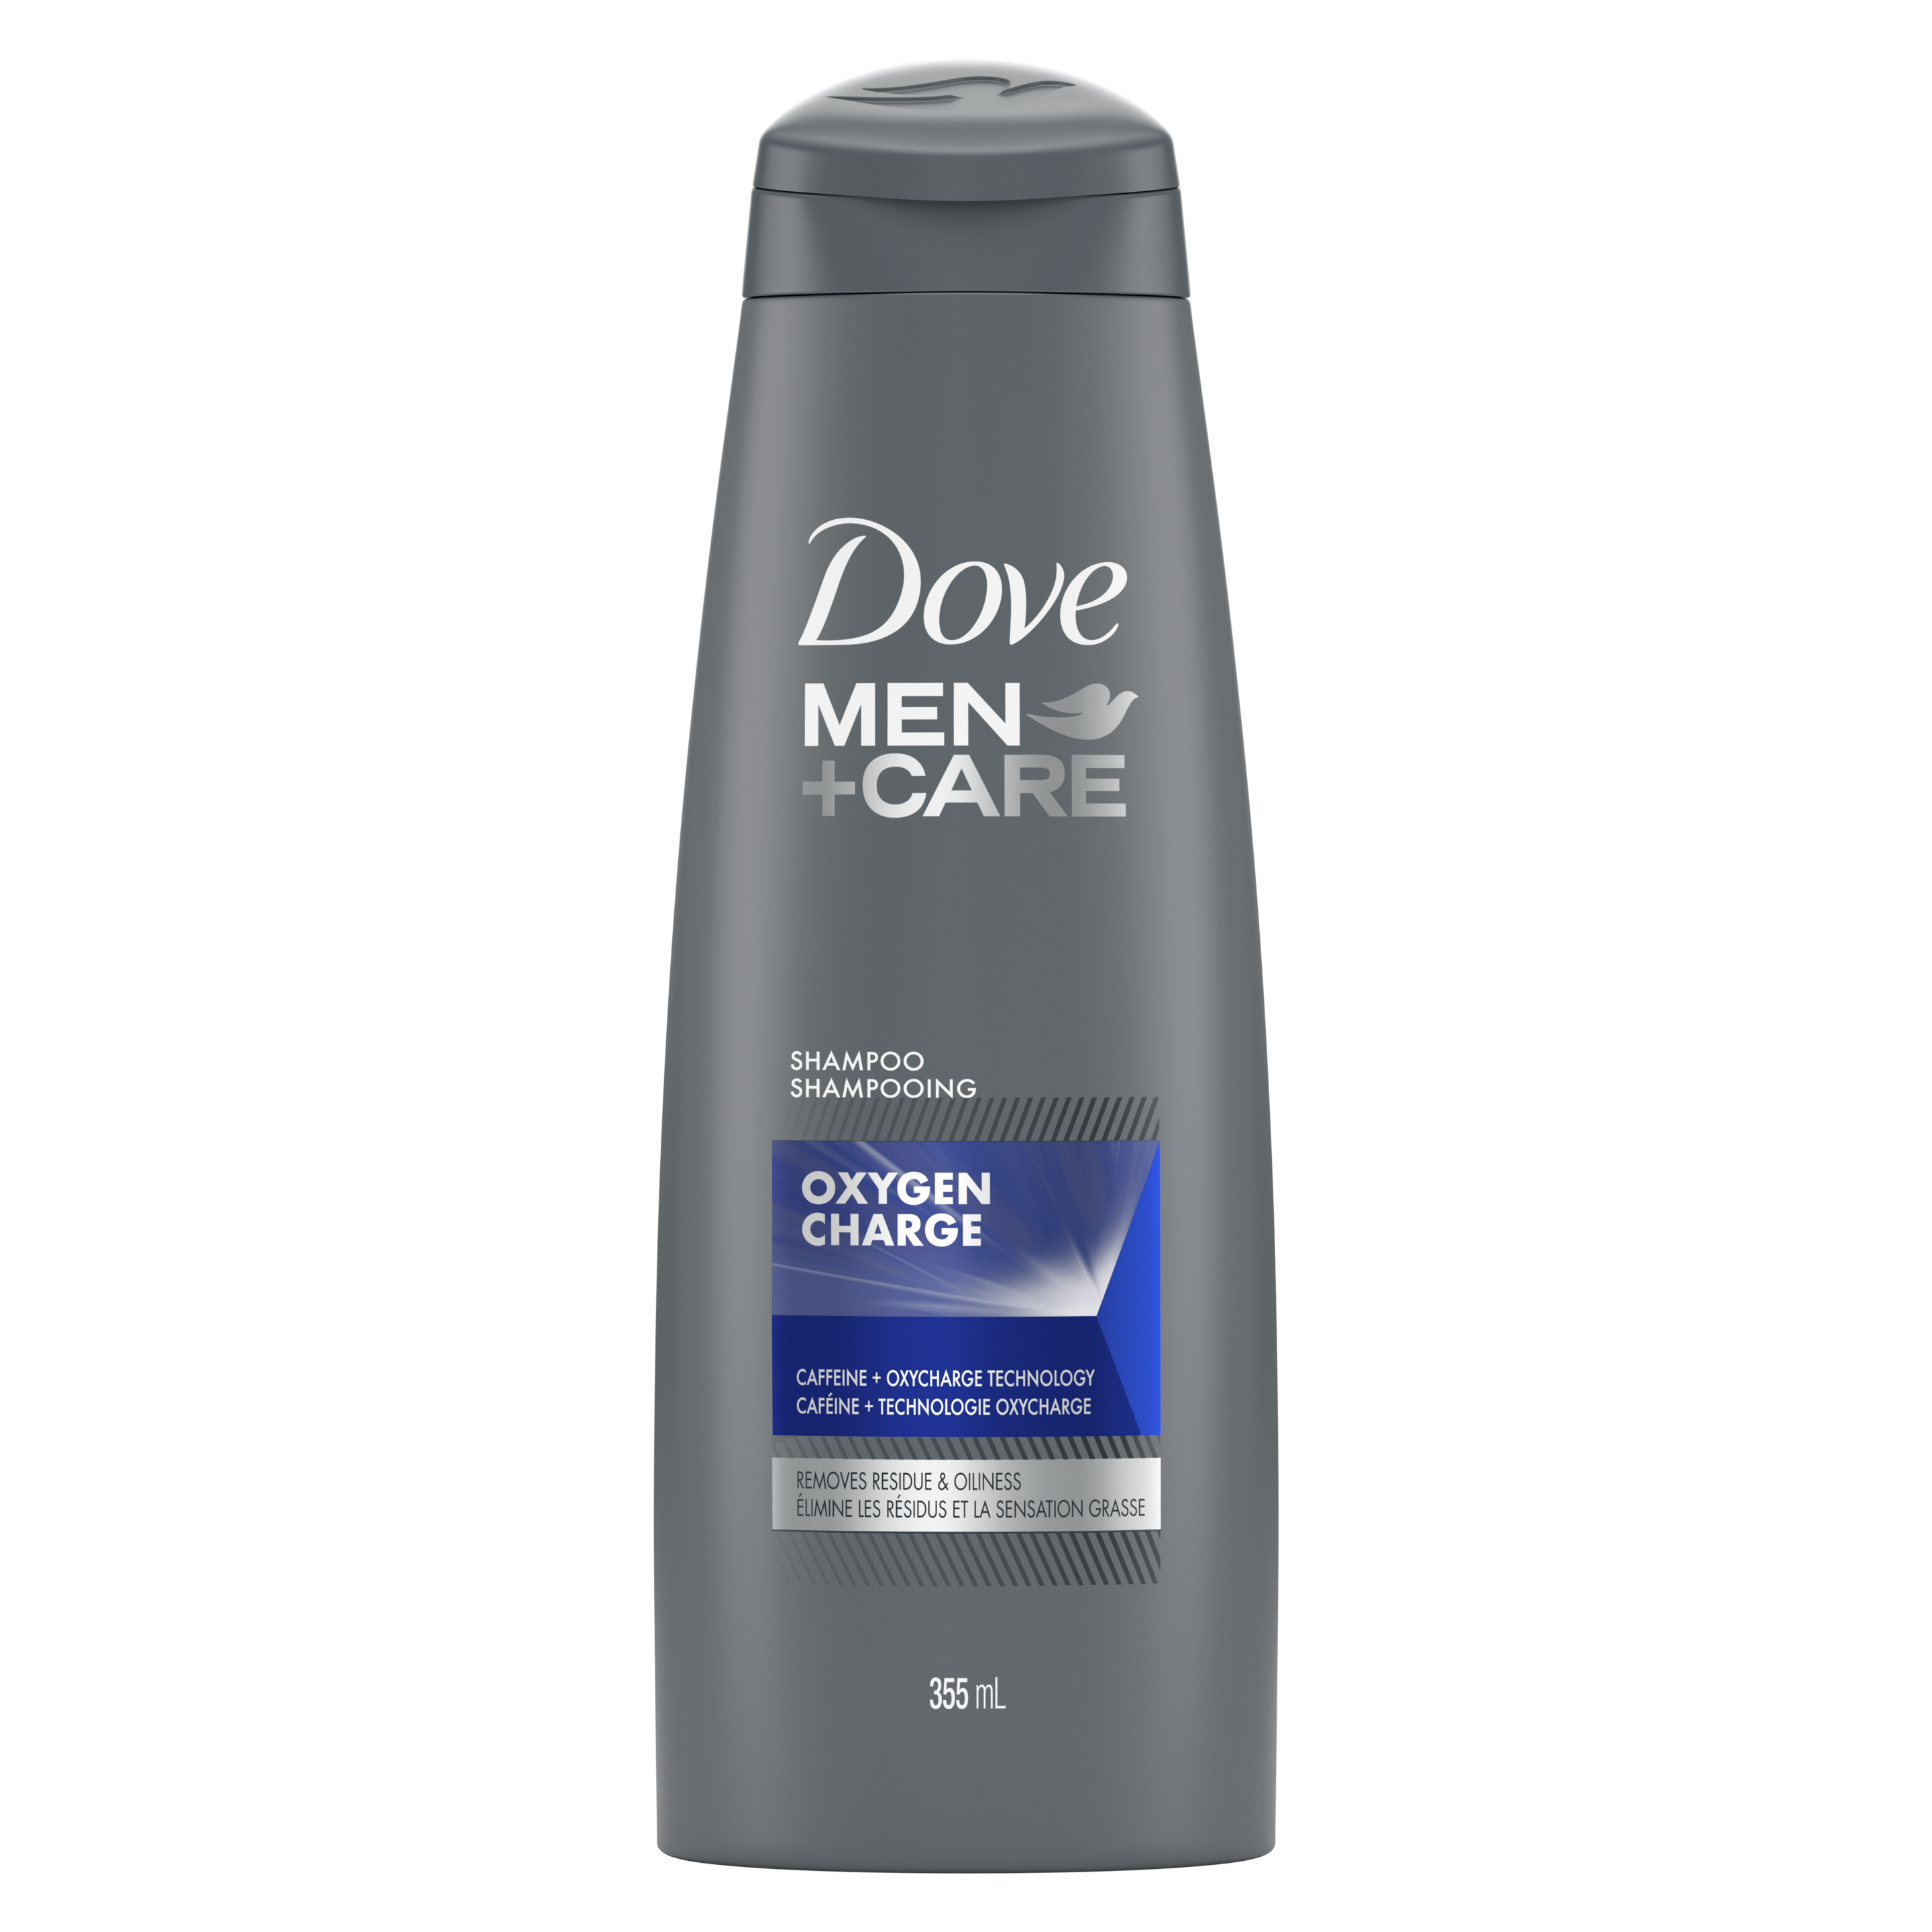 Men+Care Oxygen Charge Shampoo 355ml Front of Pack